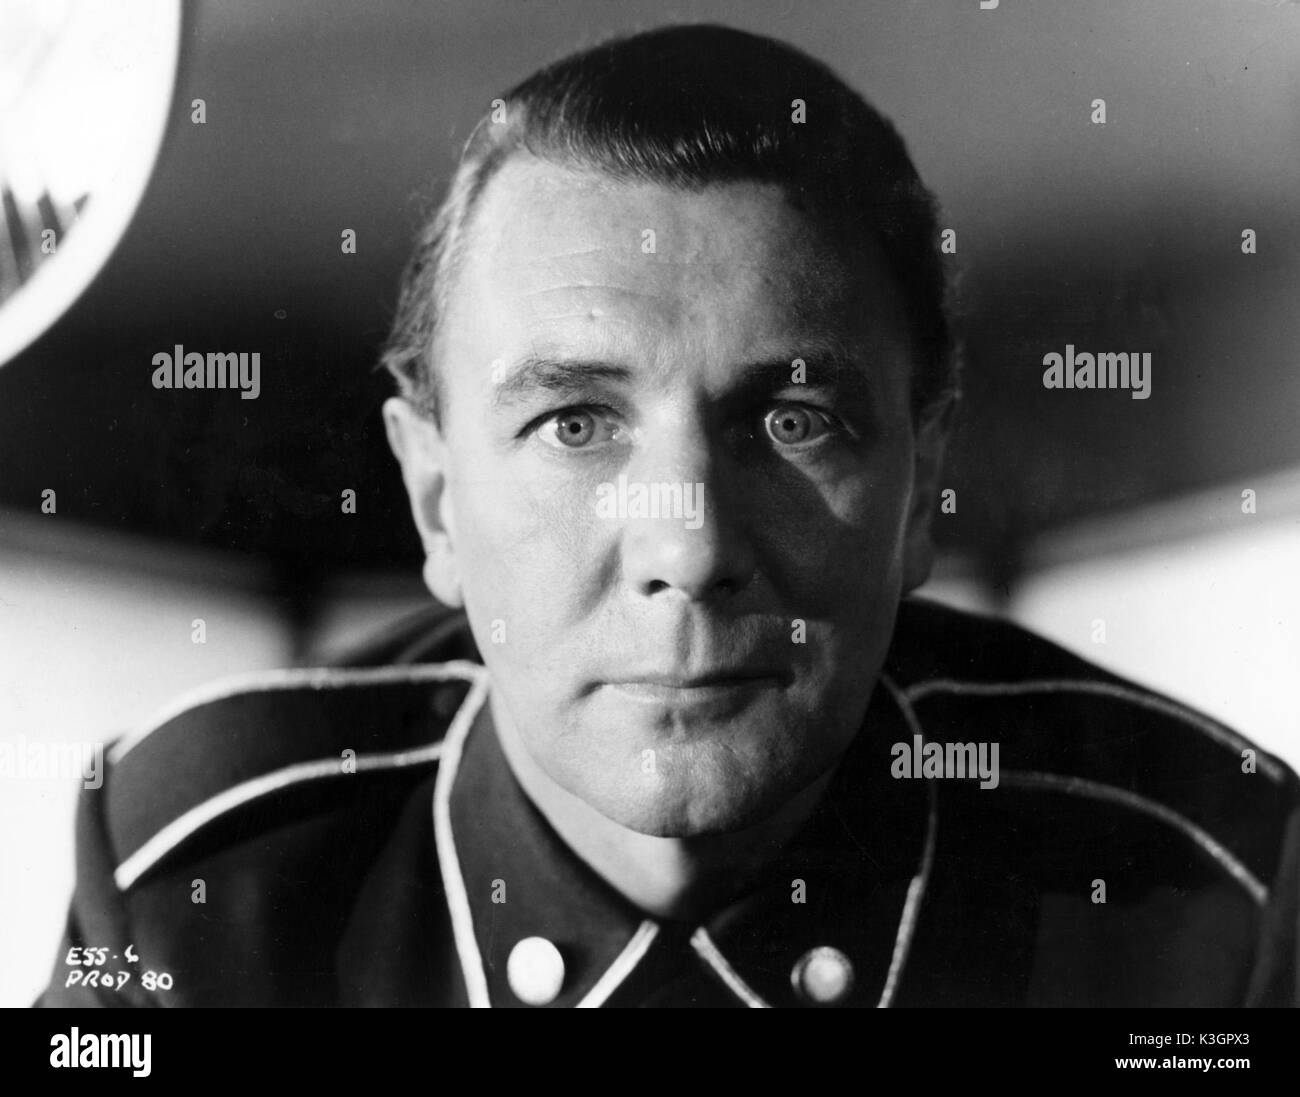 Michael oconnor Black and White Stock Photos & Images - Alamy